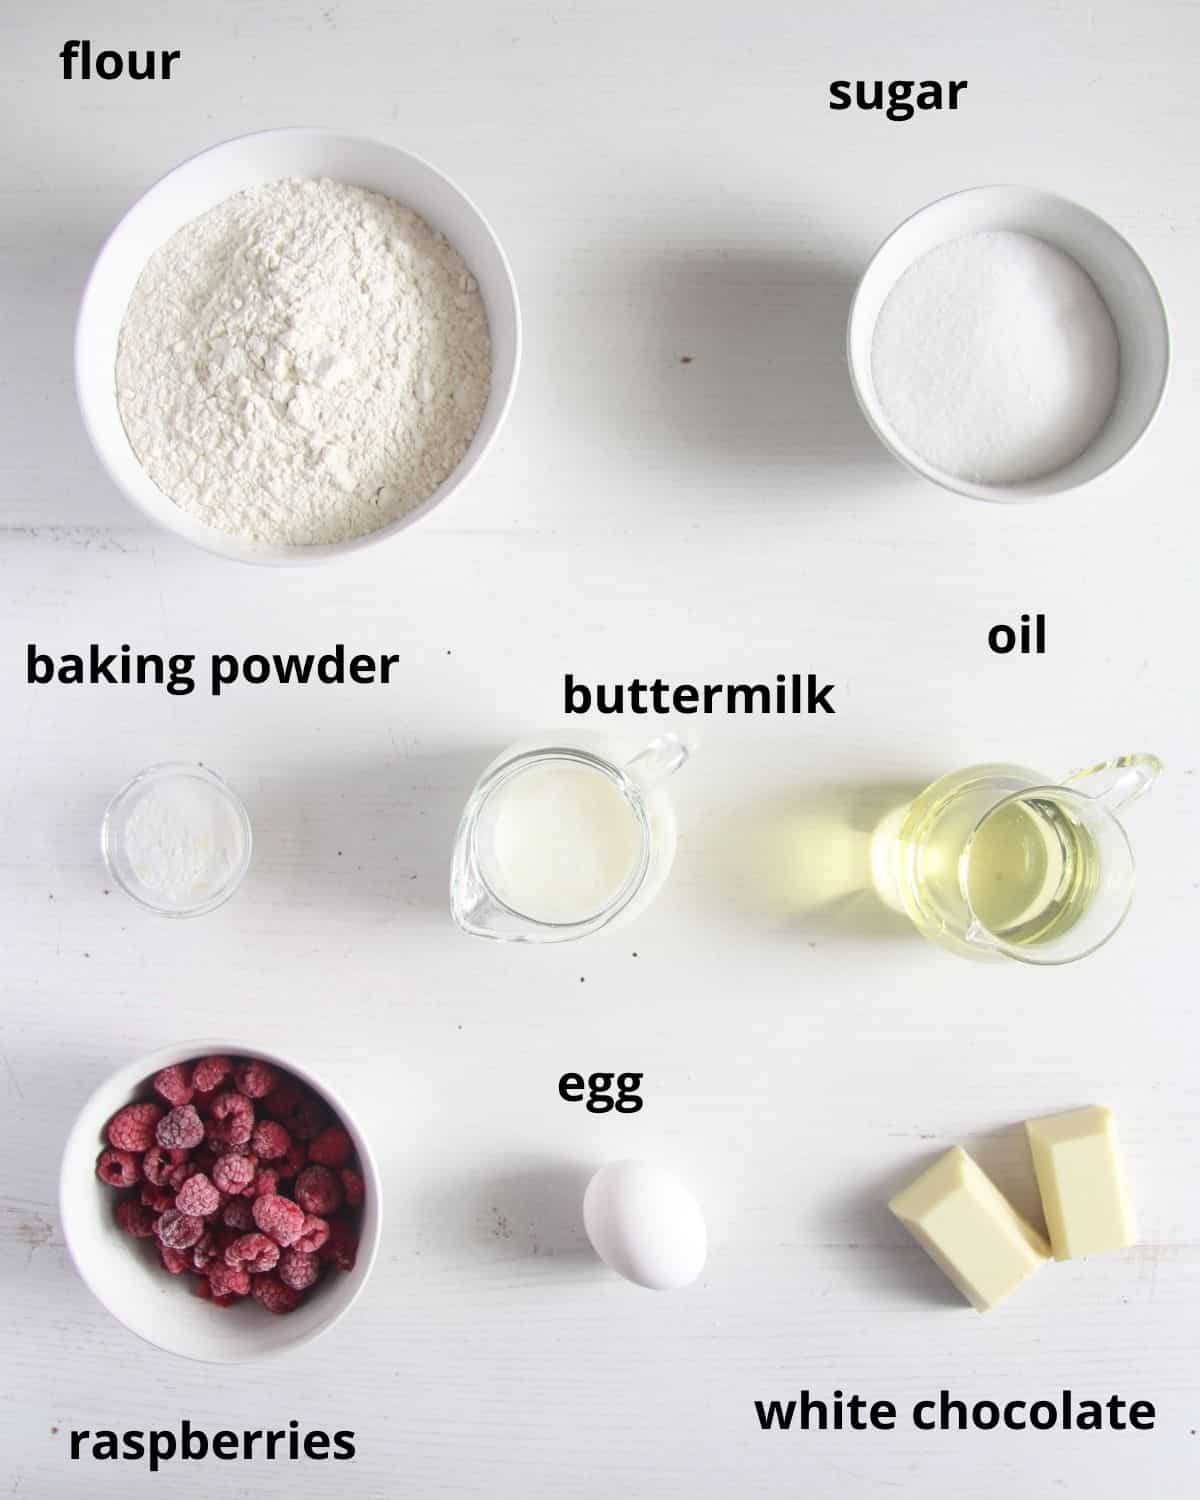 listed ingredients for making muffins with white chocolate and berries.